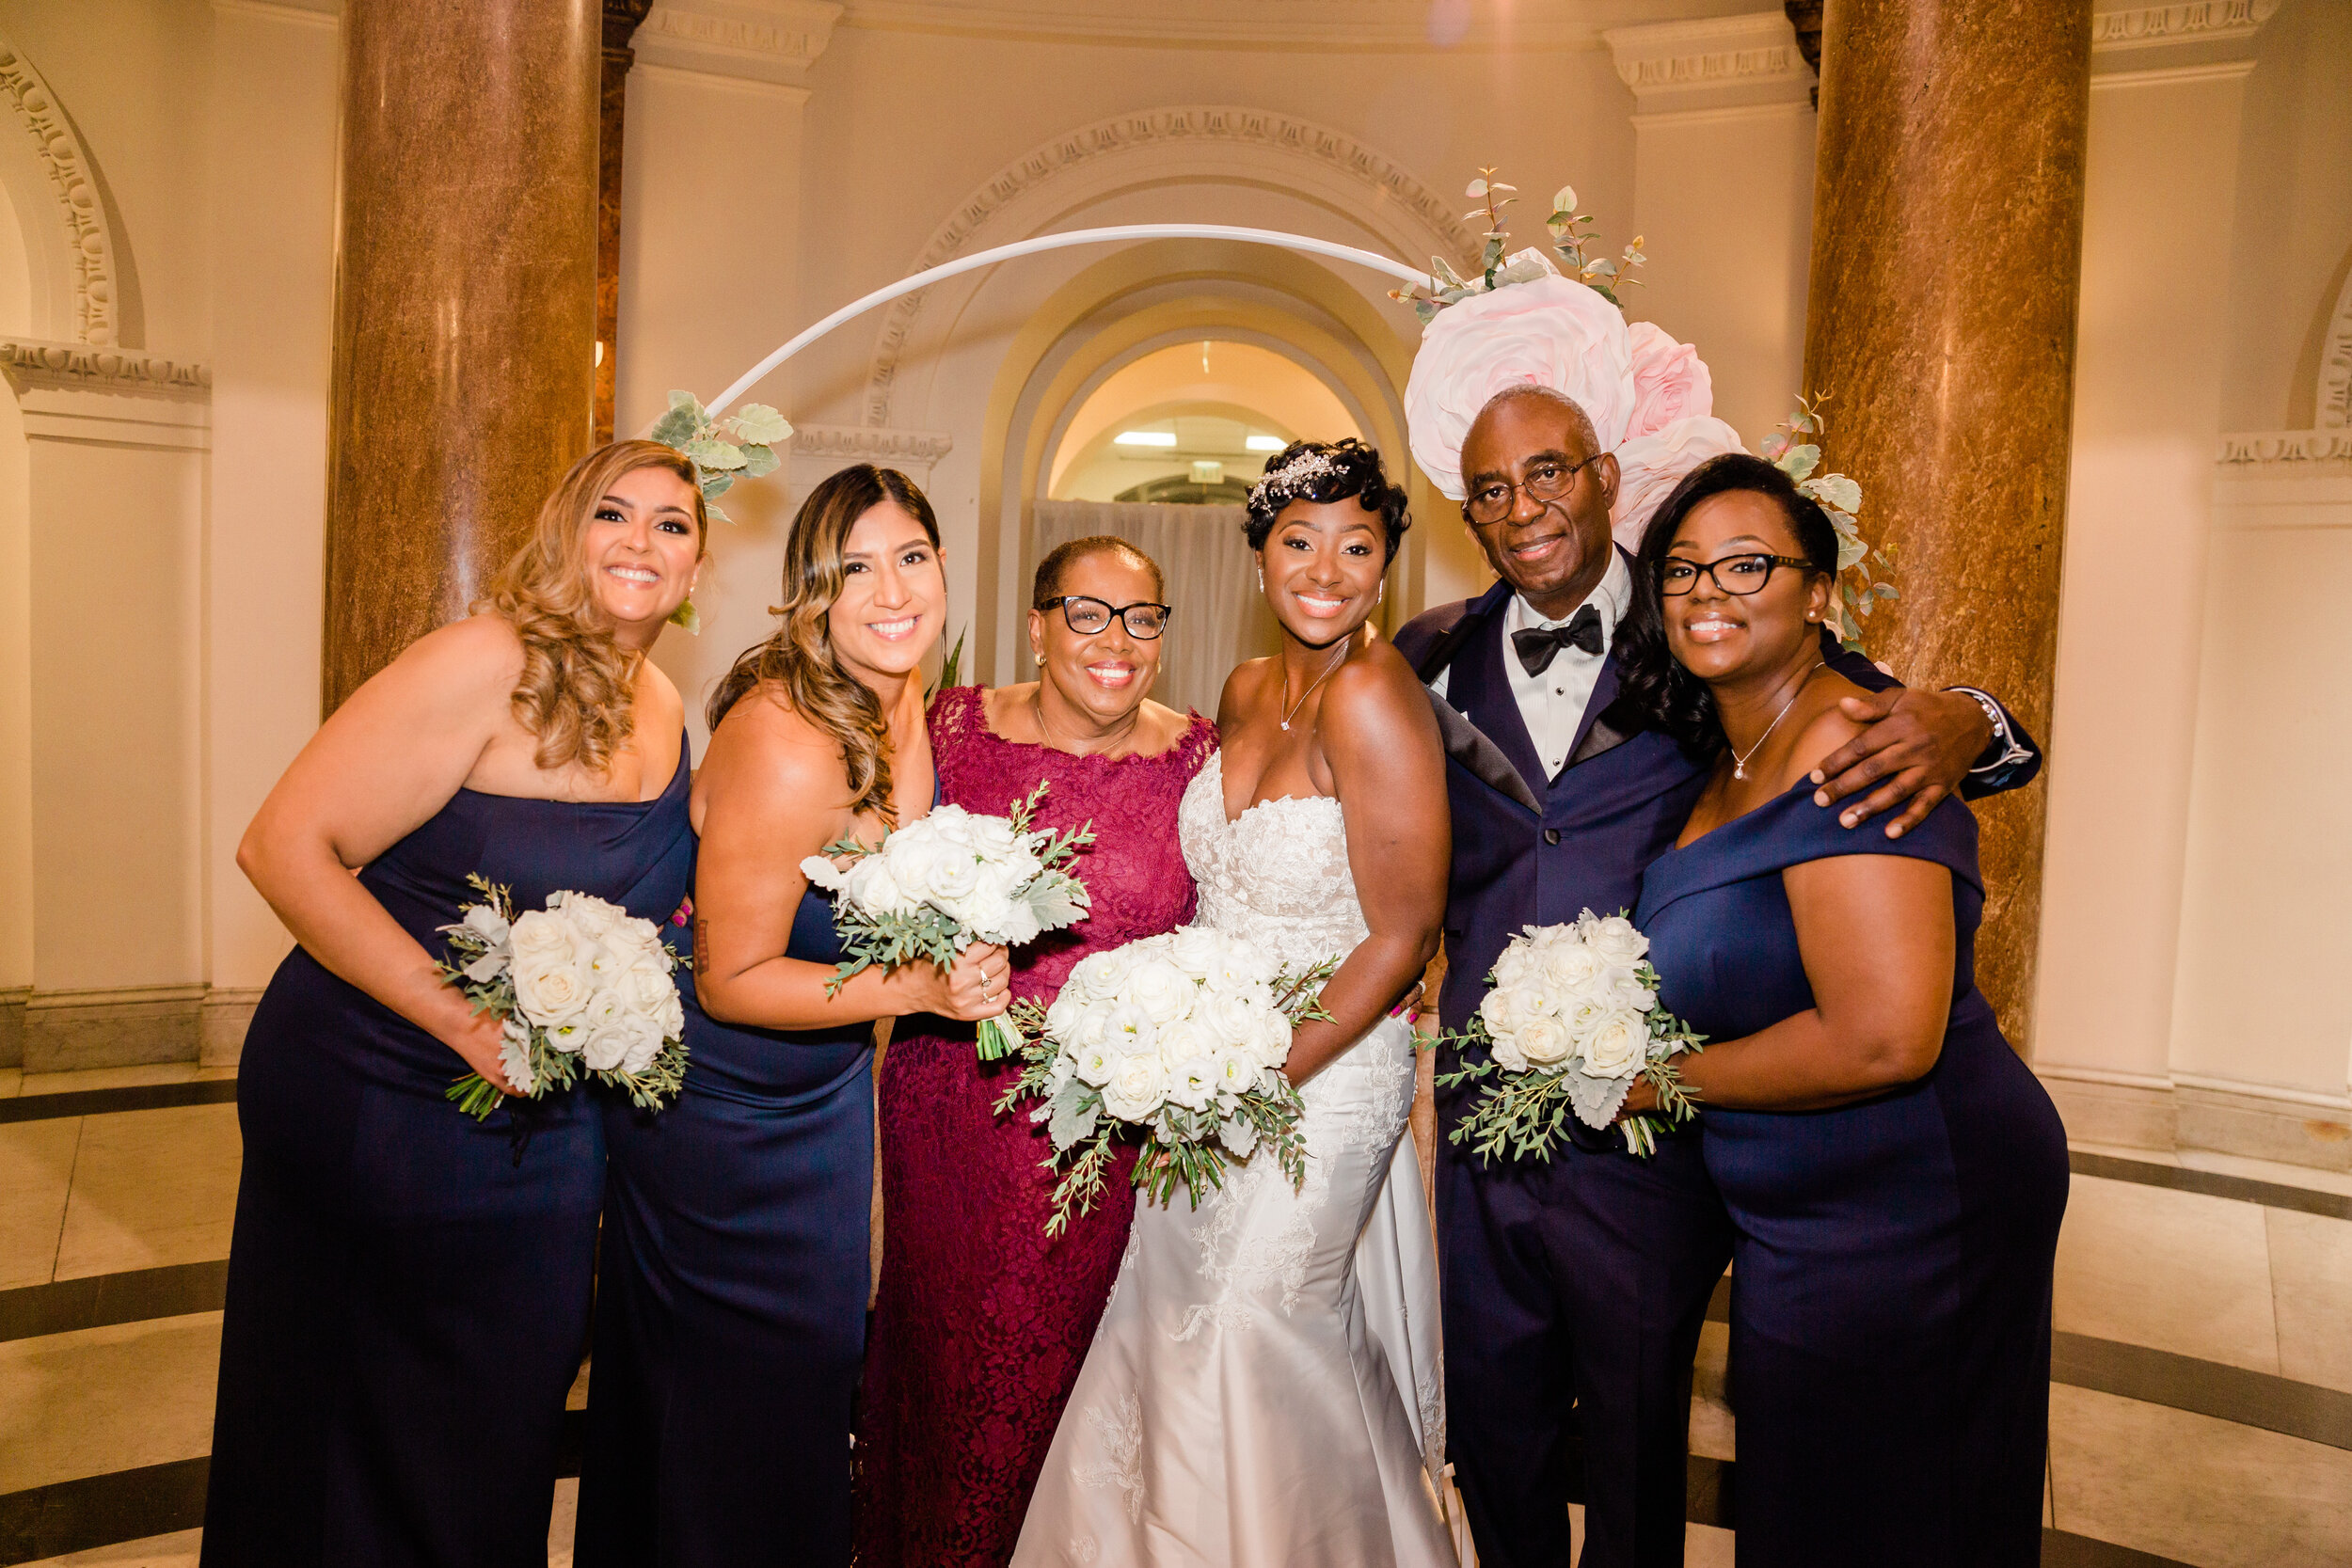 get married in baltimore city hall shot by megapixels media biracial couple wedding photographers maryland-78.jpg